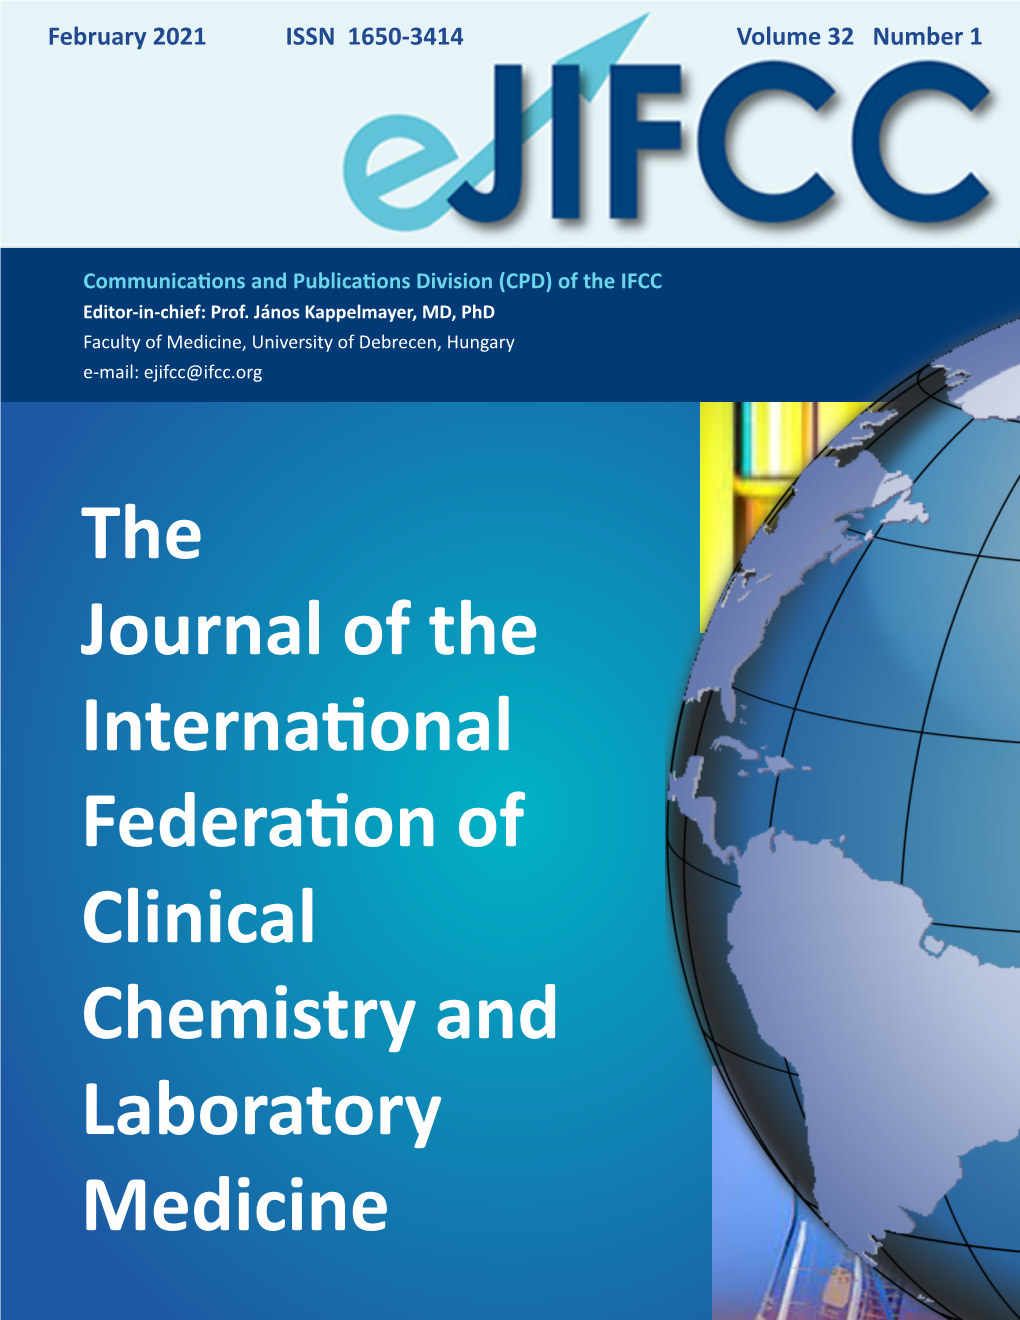 The Journal of the International Federation of Clinical Chemistry and Laboratory Medicine in This Issue